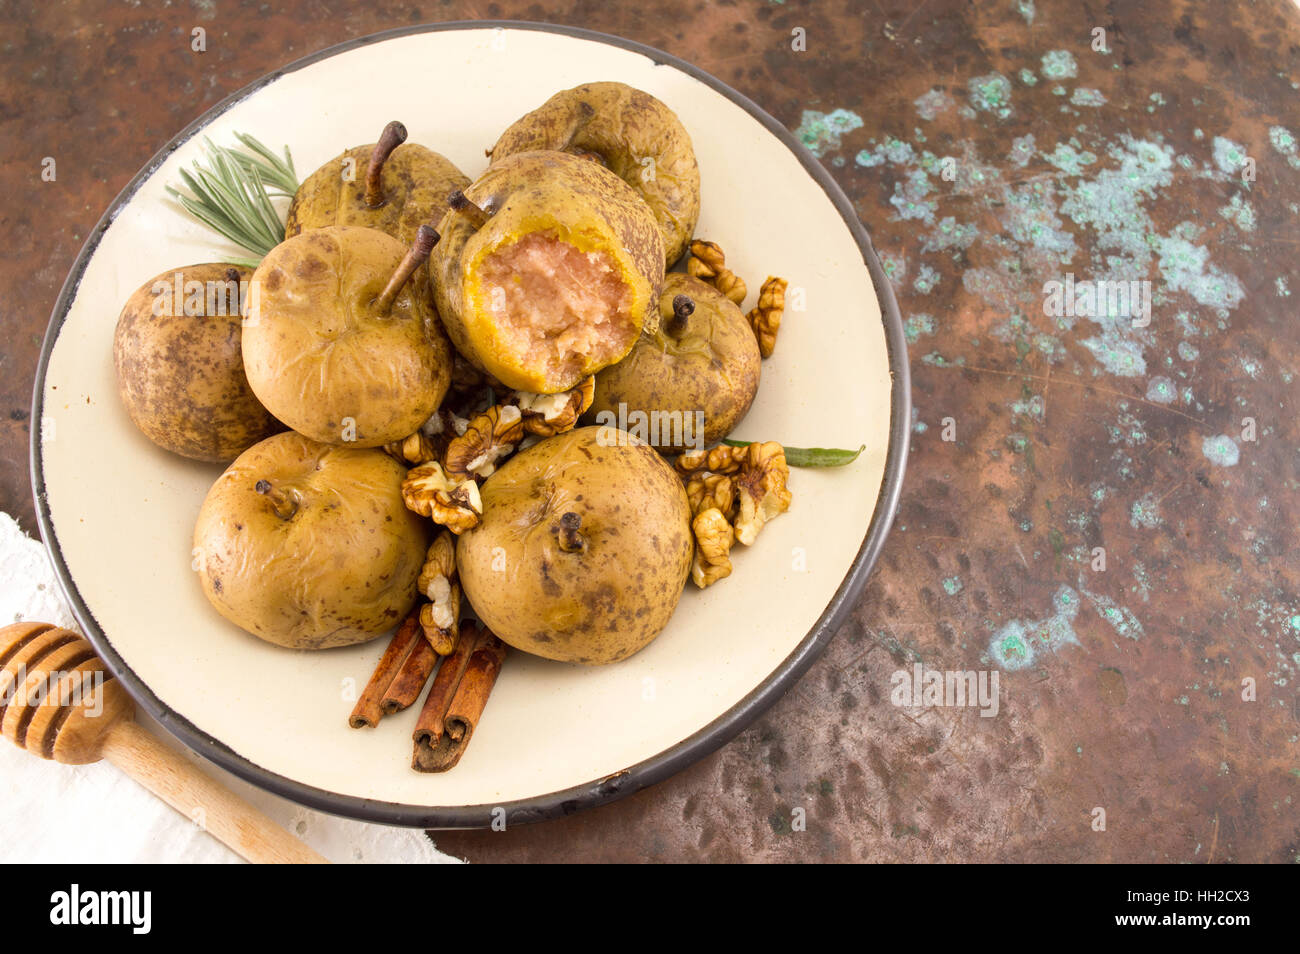 boiled wild pears with walnuts and cinnamon on a plate Stock Photo